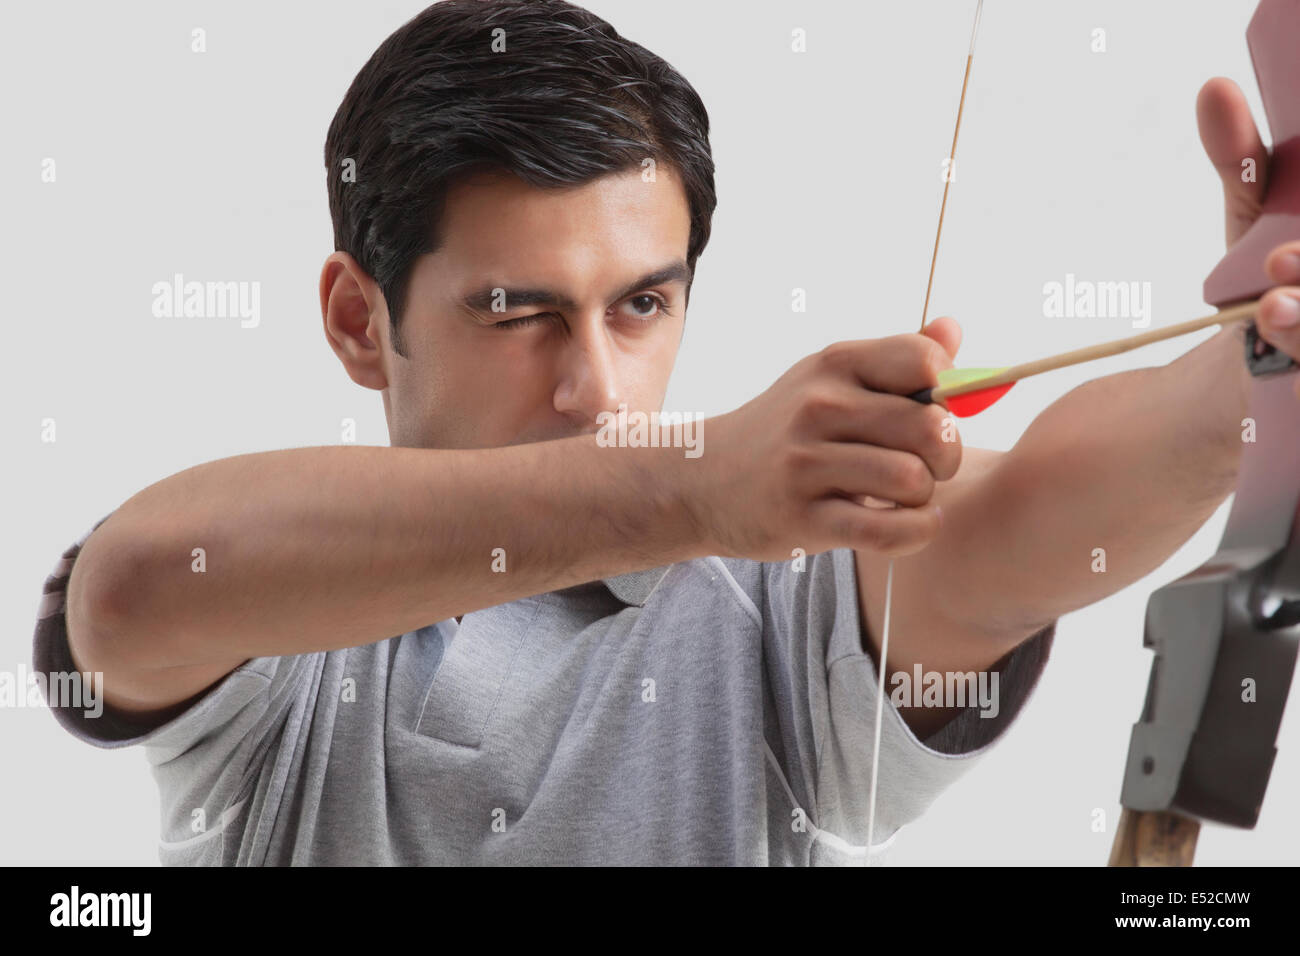 Male archer aiming bow and arrow isolated over gray background Stock Photo